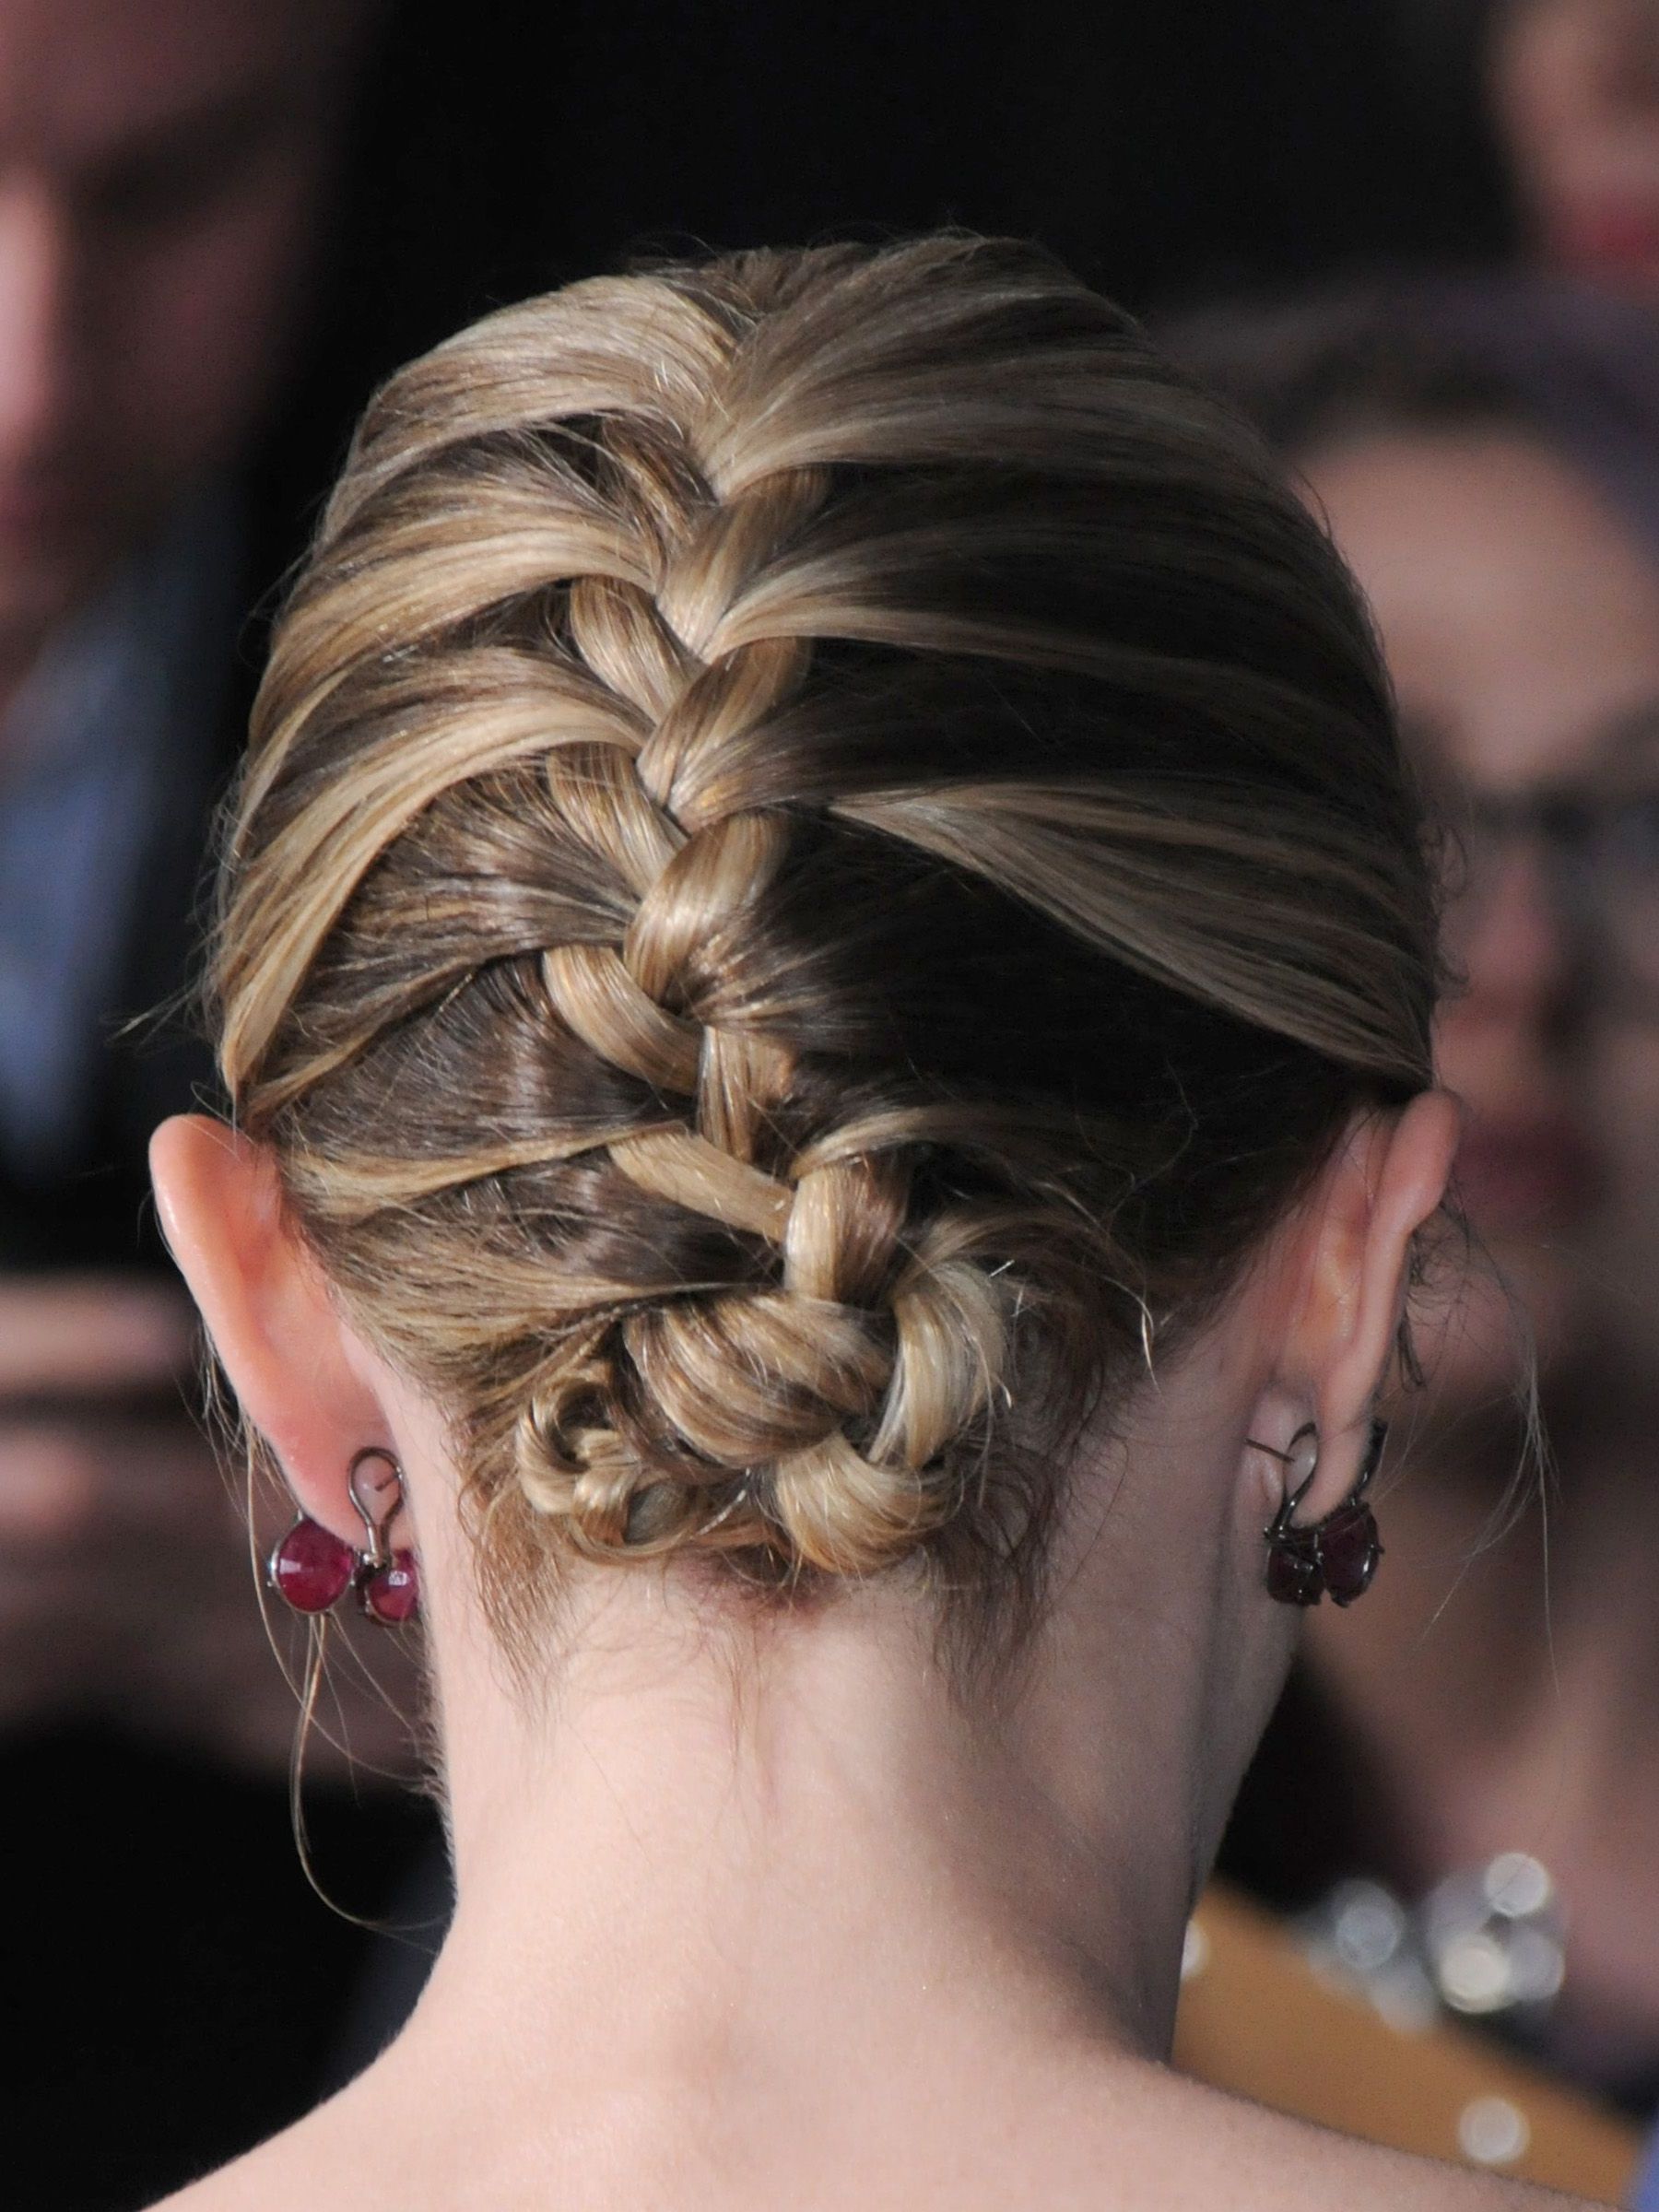 33 Braid Styles We Love – Best Hair Plaits For Long Hair Inside Most Recent Plaited Chignon Braided Hairstyles (View 7 of 20)